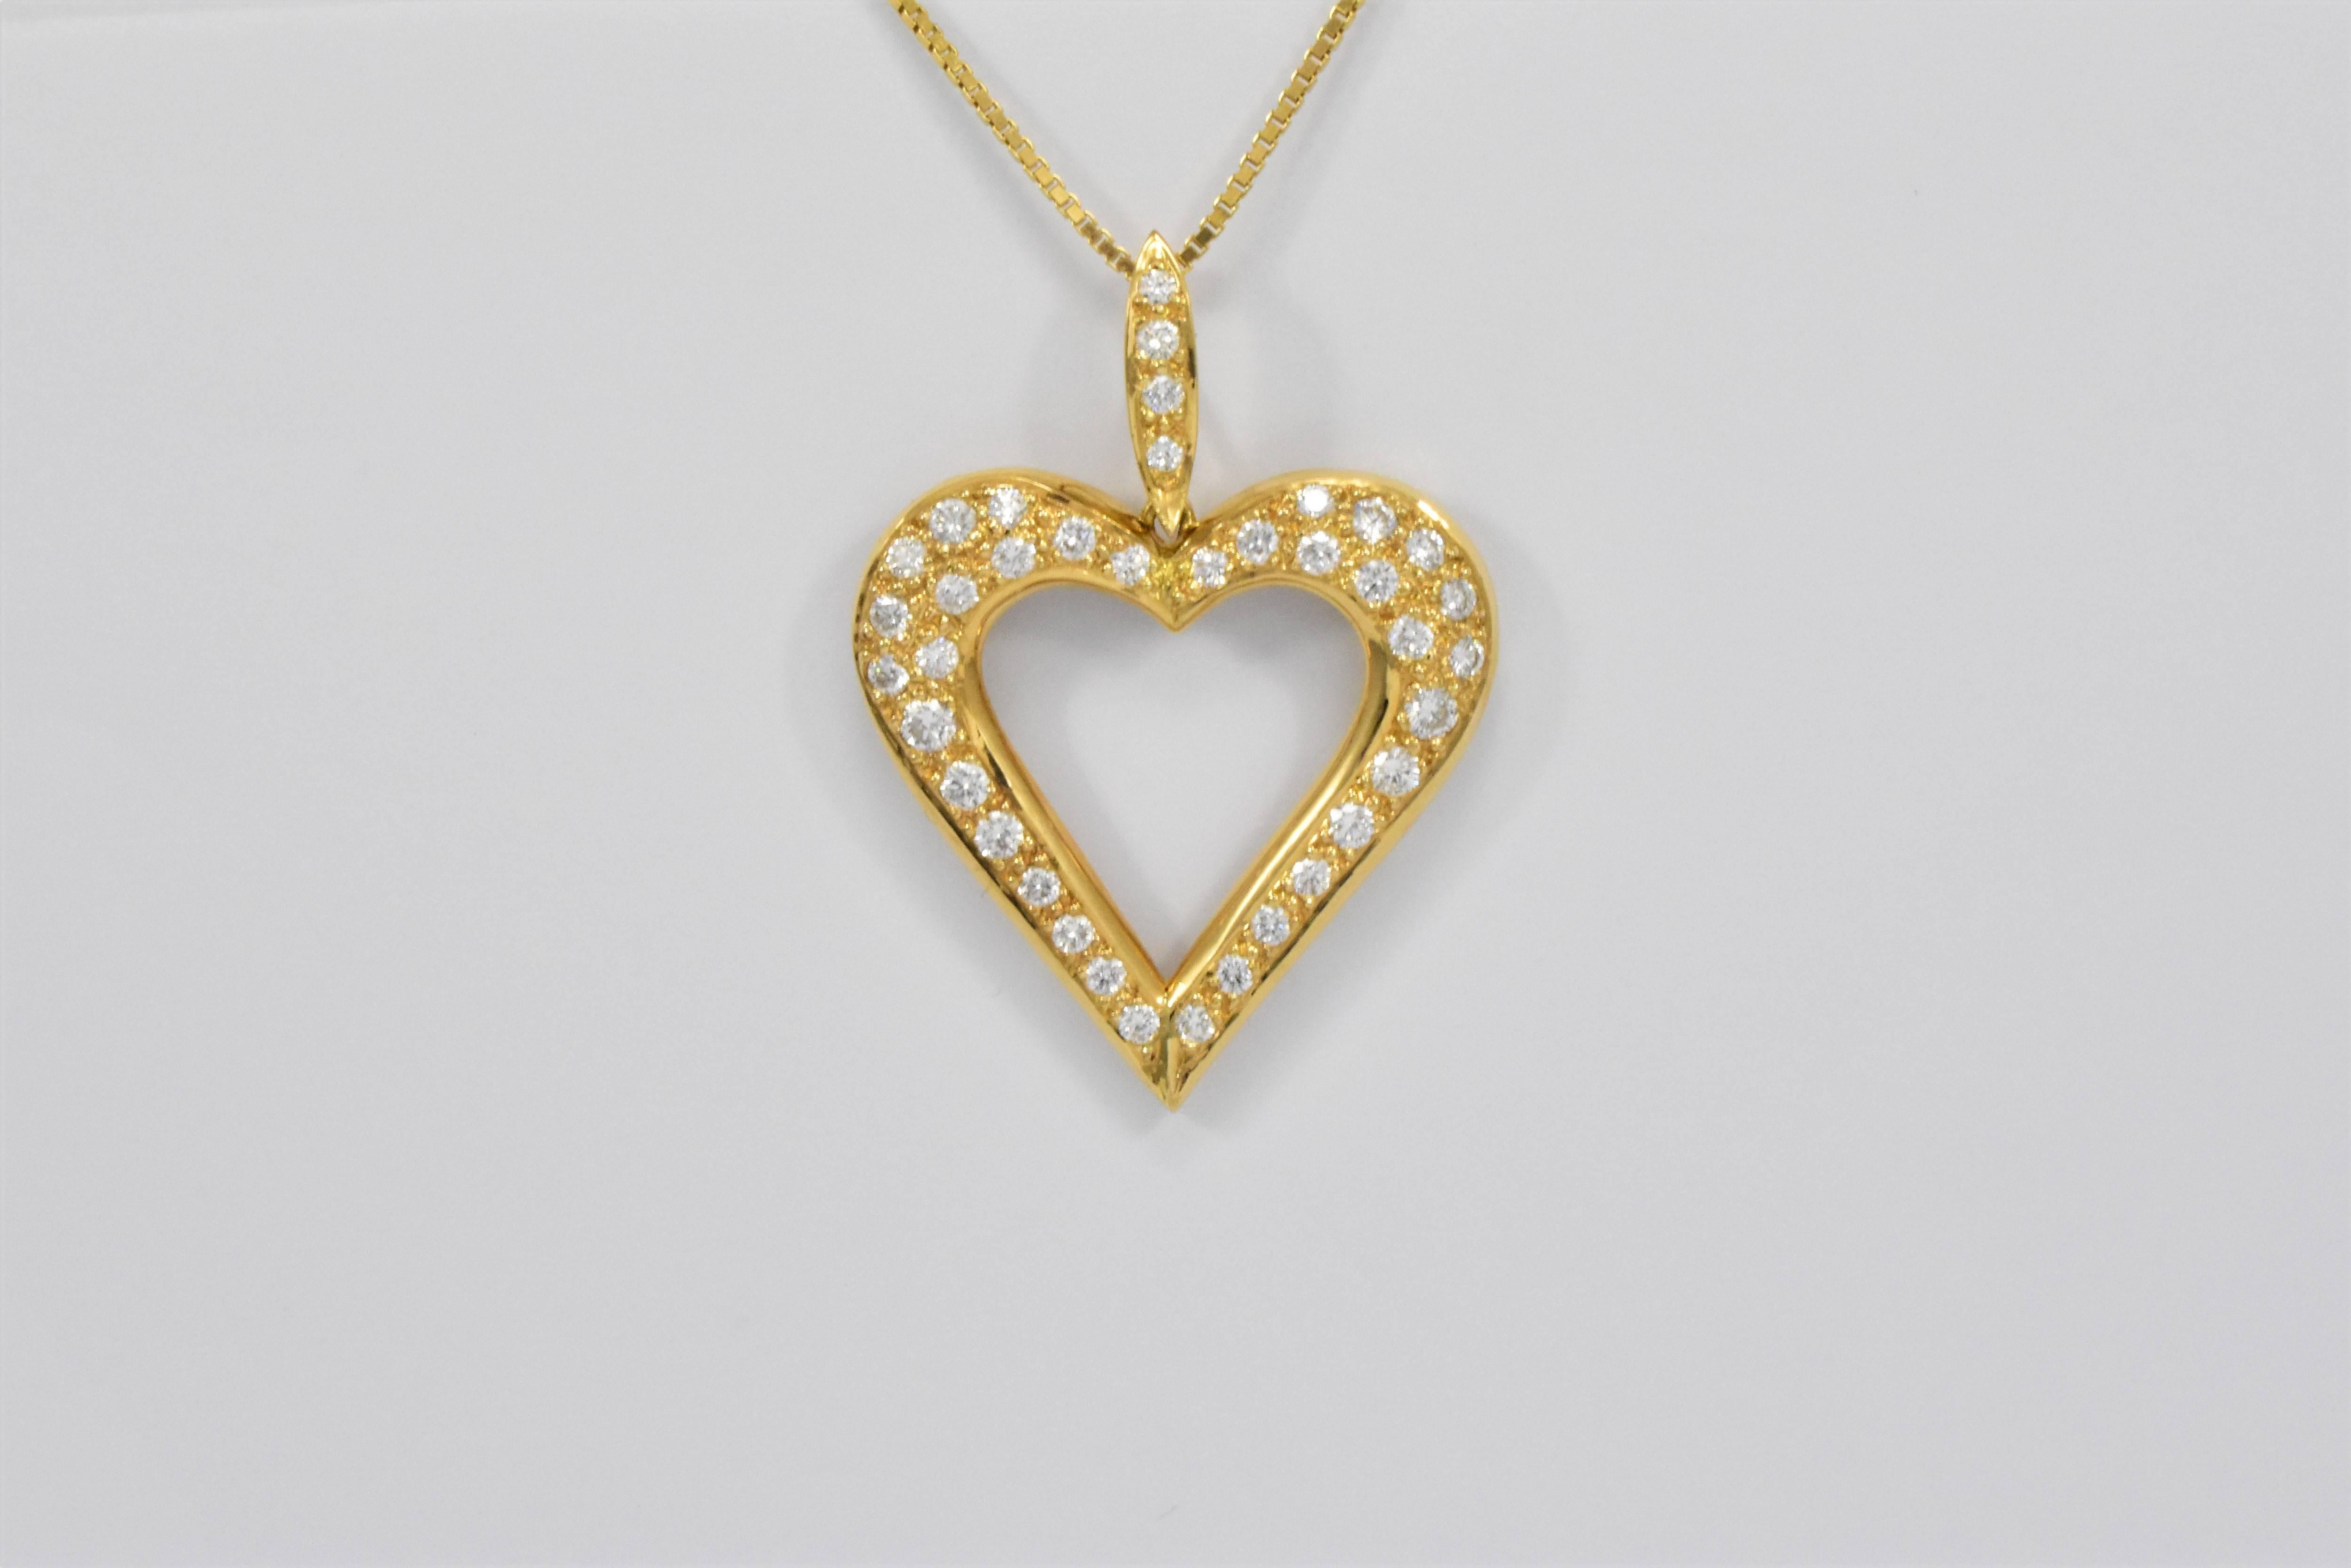 A striking bright large gold heart pendant beautifully proportioned with a diamond set sculptural hinged bail chain loop. The Open Heart has a gently curved rounded surface set with pavé round brilliant cut diamonds in 18 karat yellow gold and comes